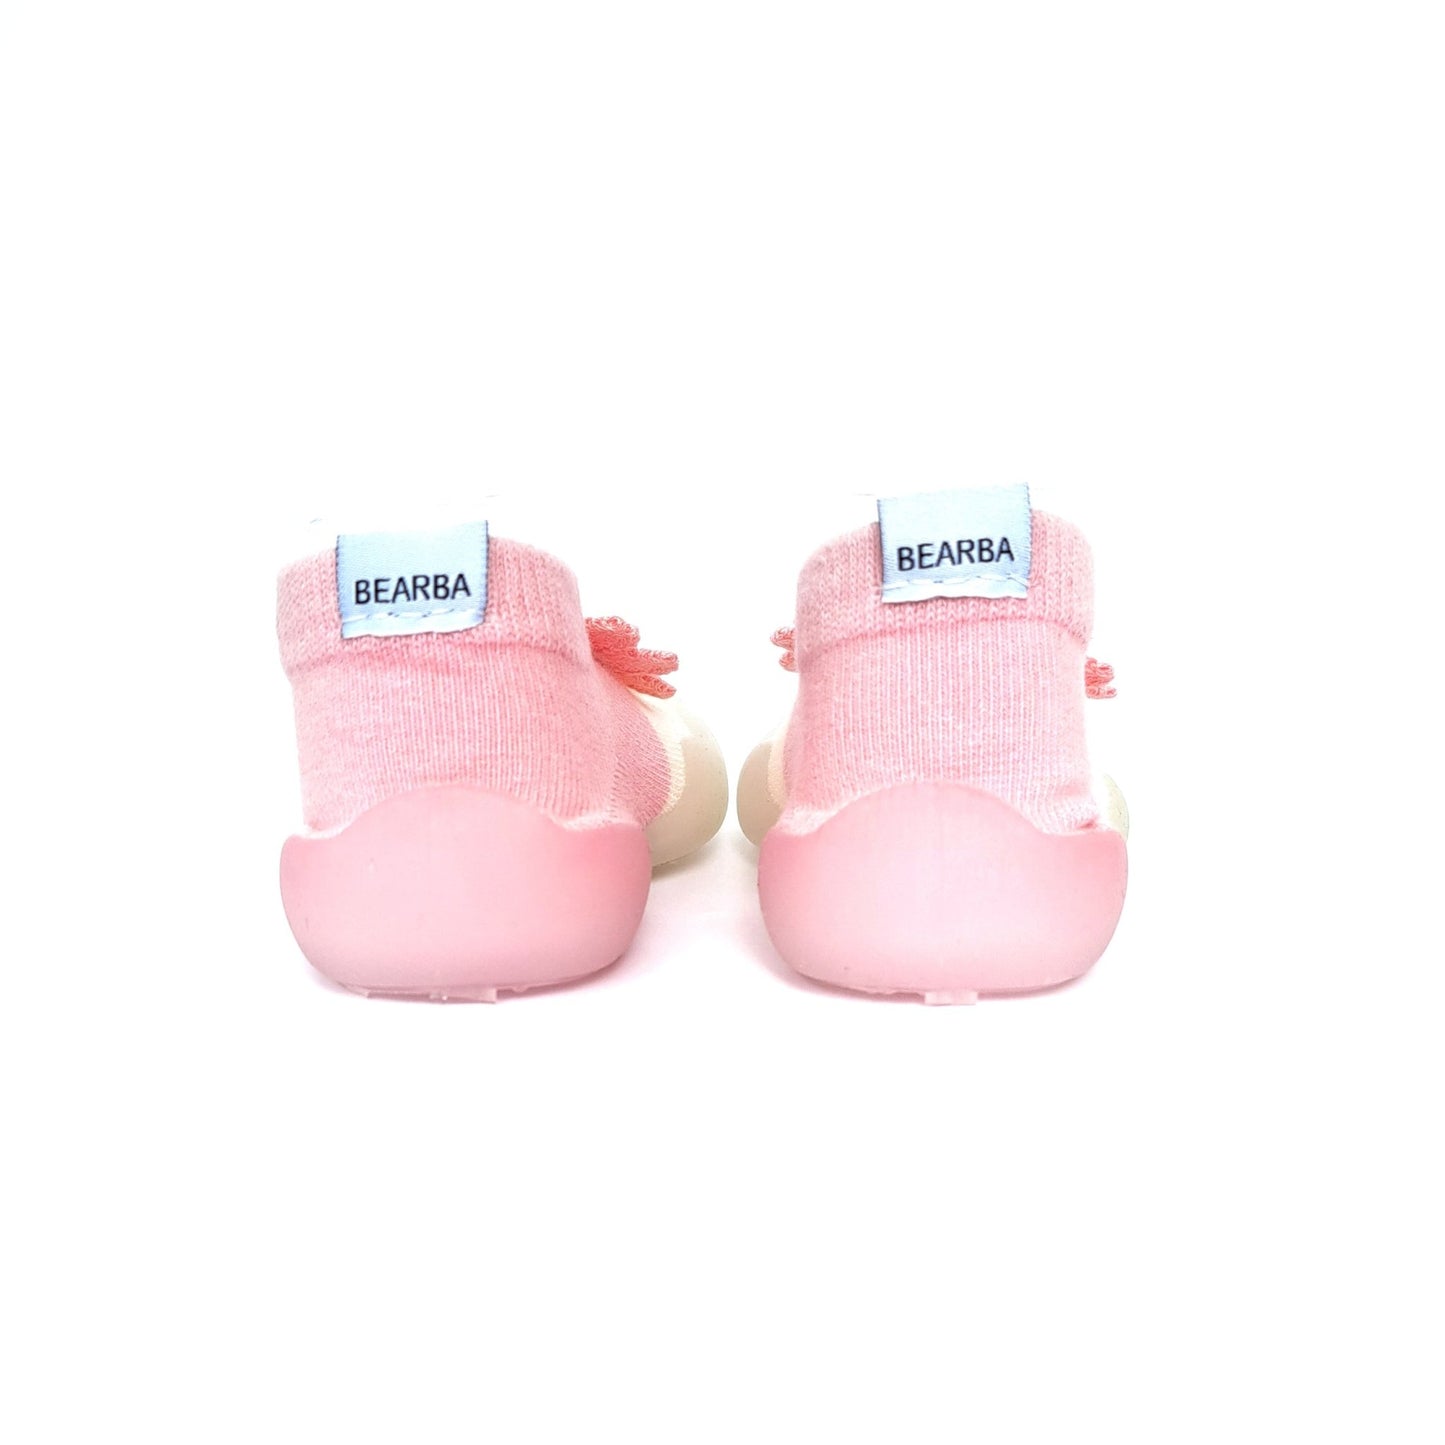 Flower Power by Bearba-Sock Shoes for Babies First Steps- Size XS- Flexible Soles, Machine Washable- Pink - Bearba